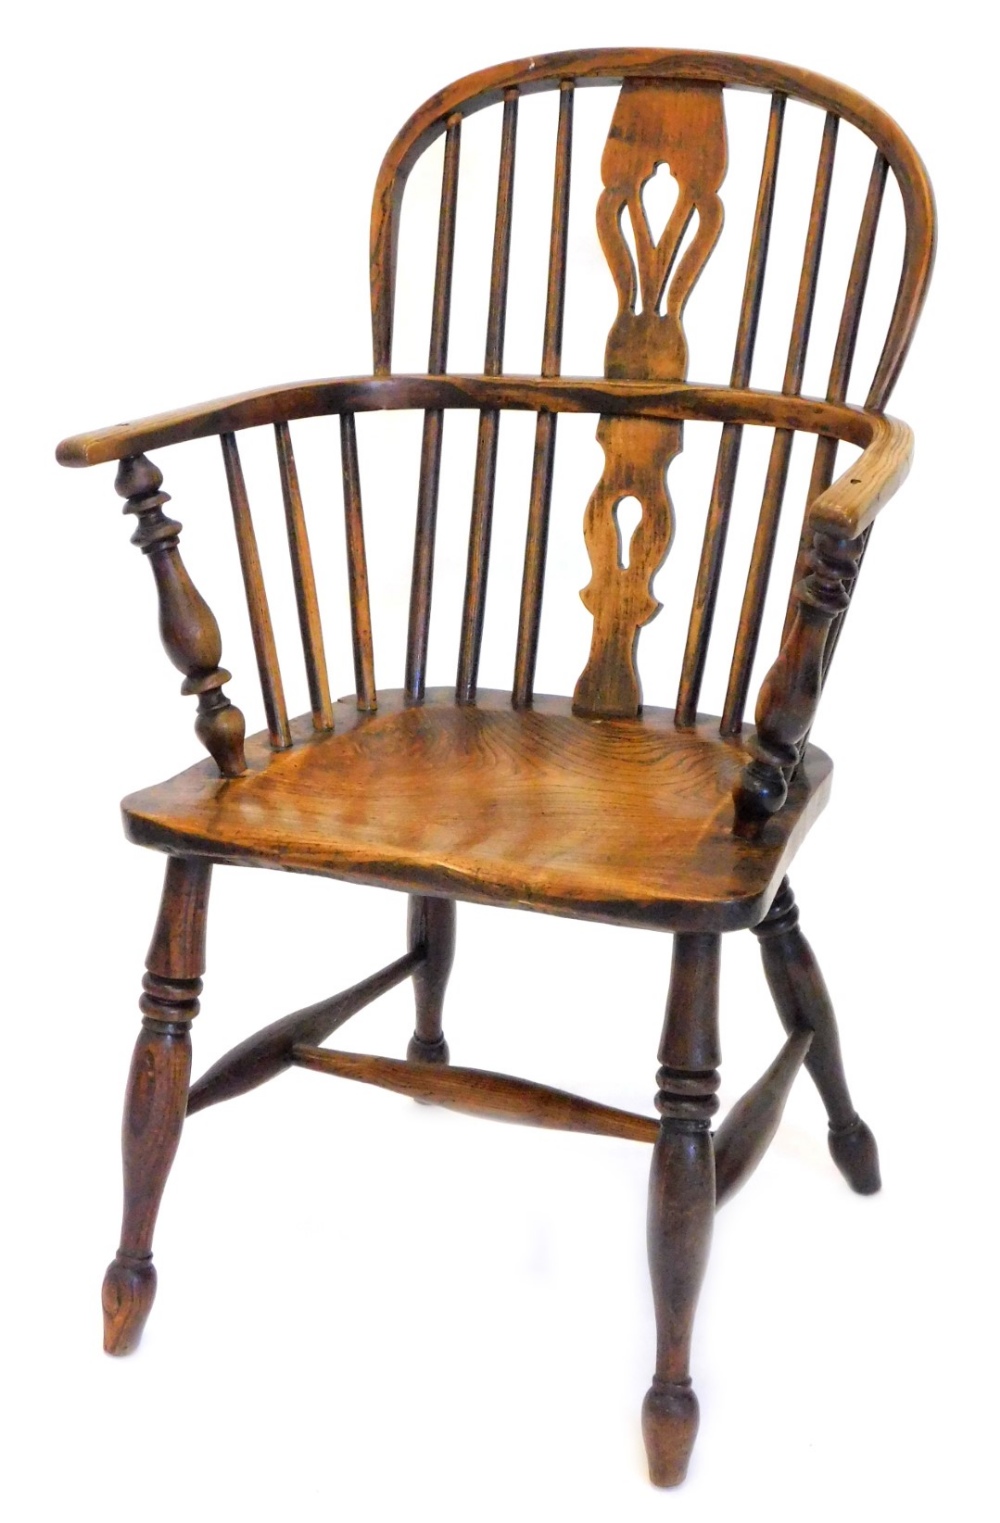 A 19thC ash and elm Windsor chair, with a pierced splat, solid seat, on turned tapering legs with